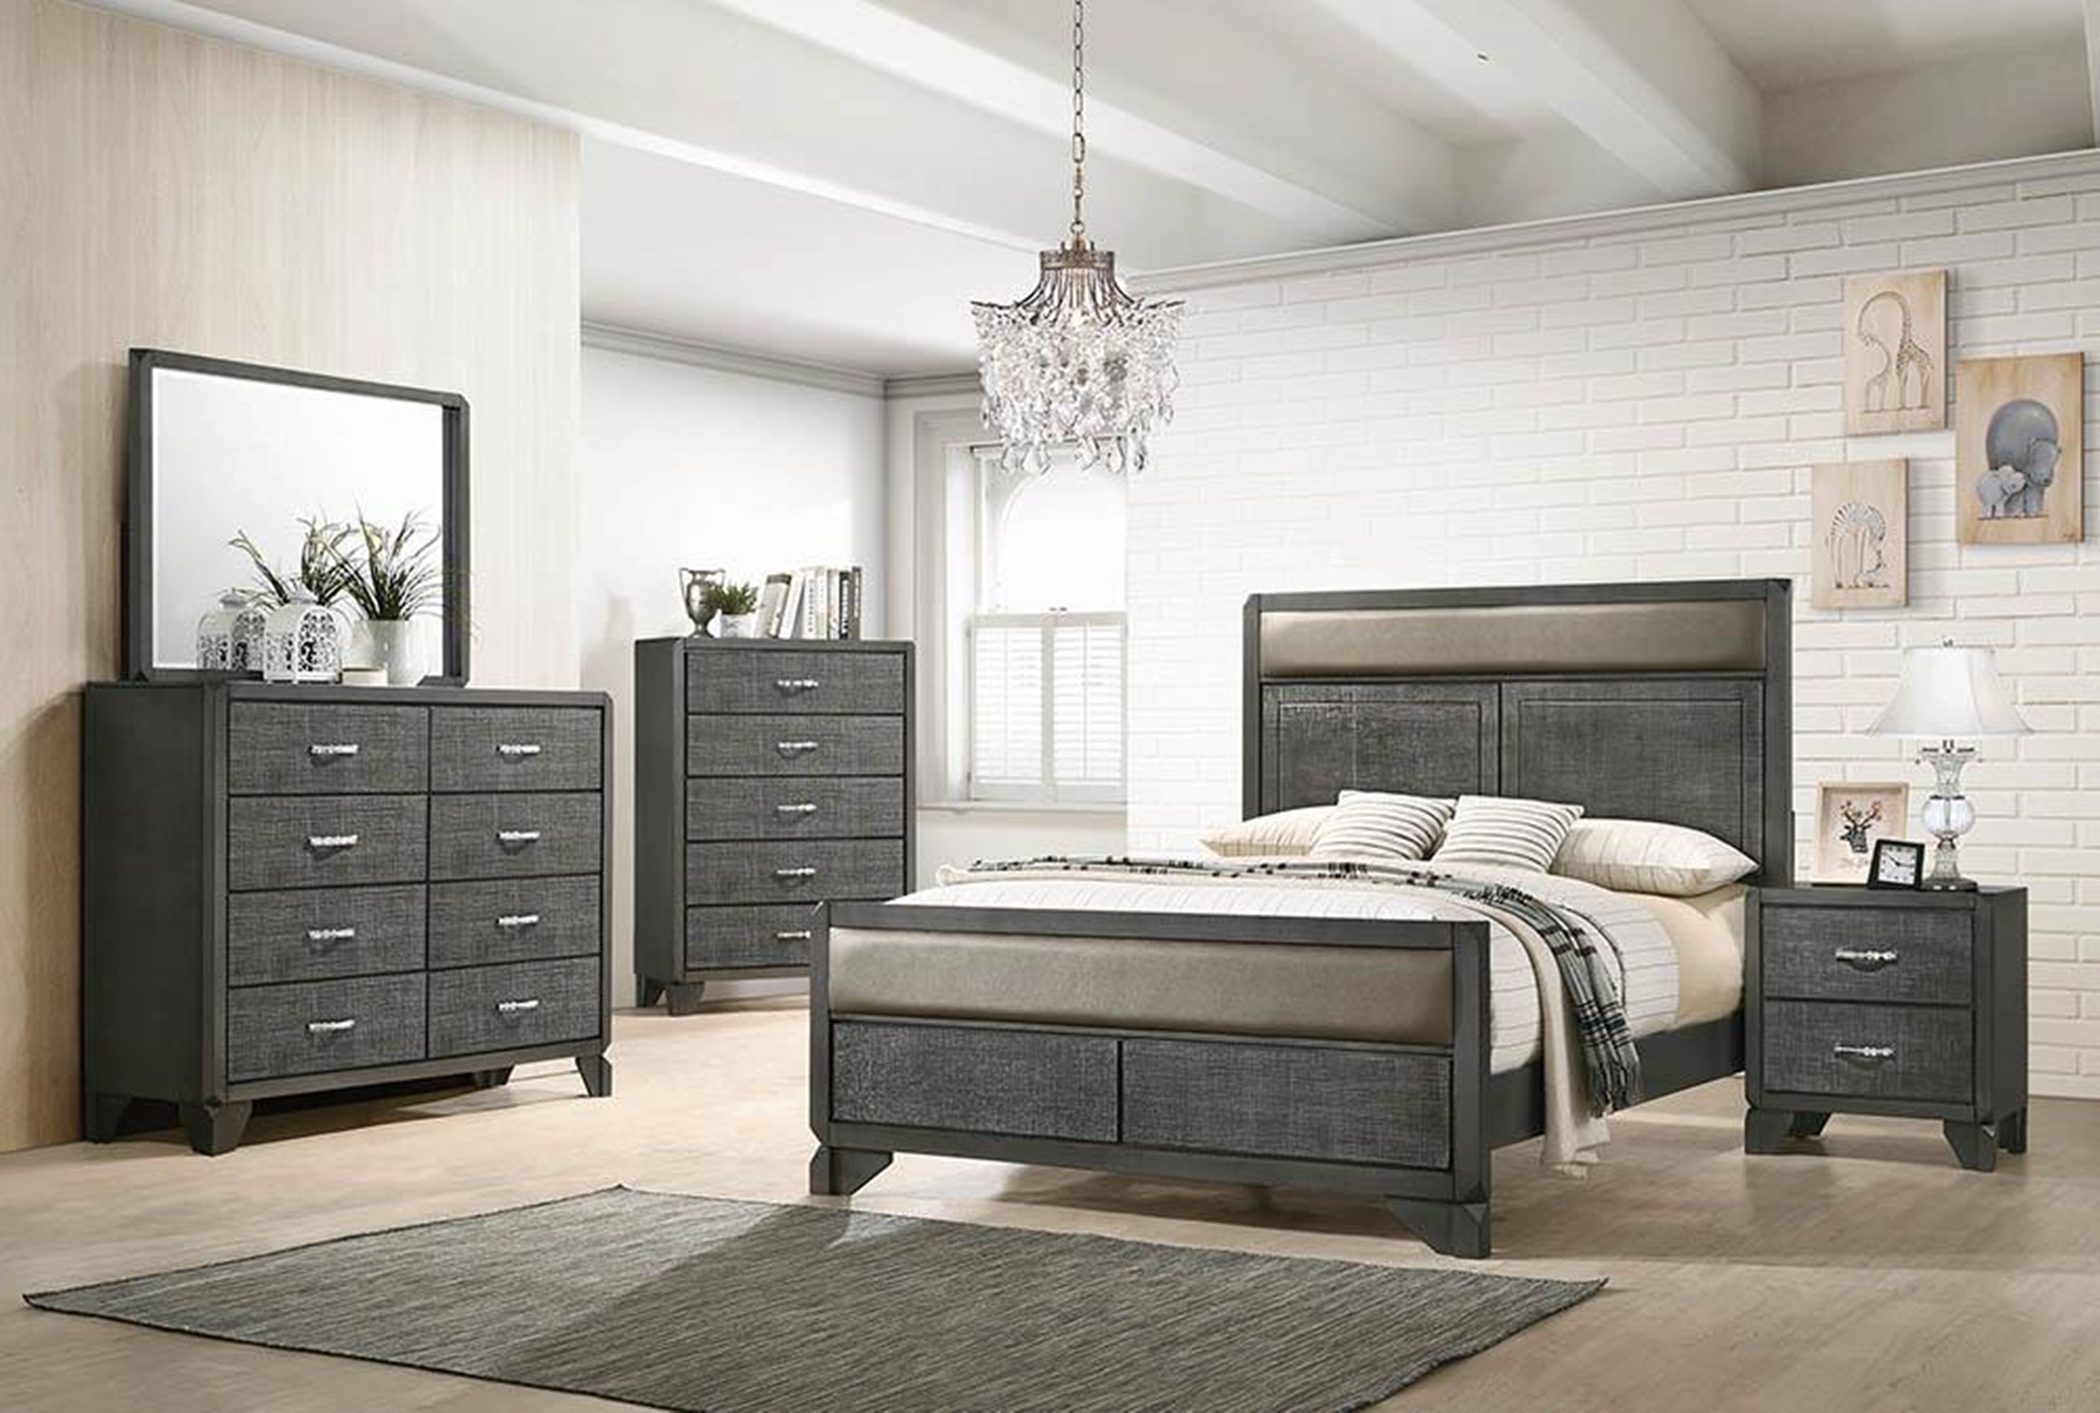 215901KW - C King Bed